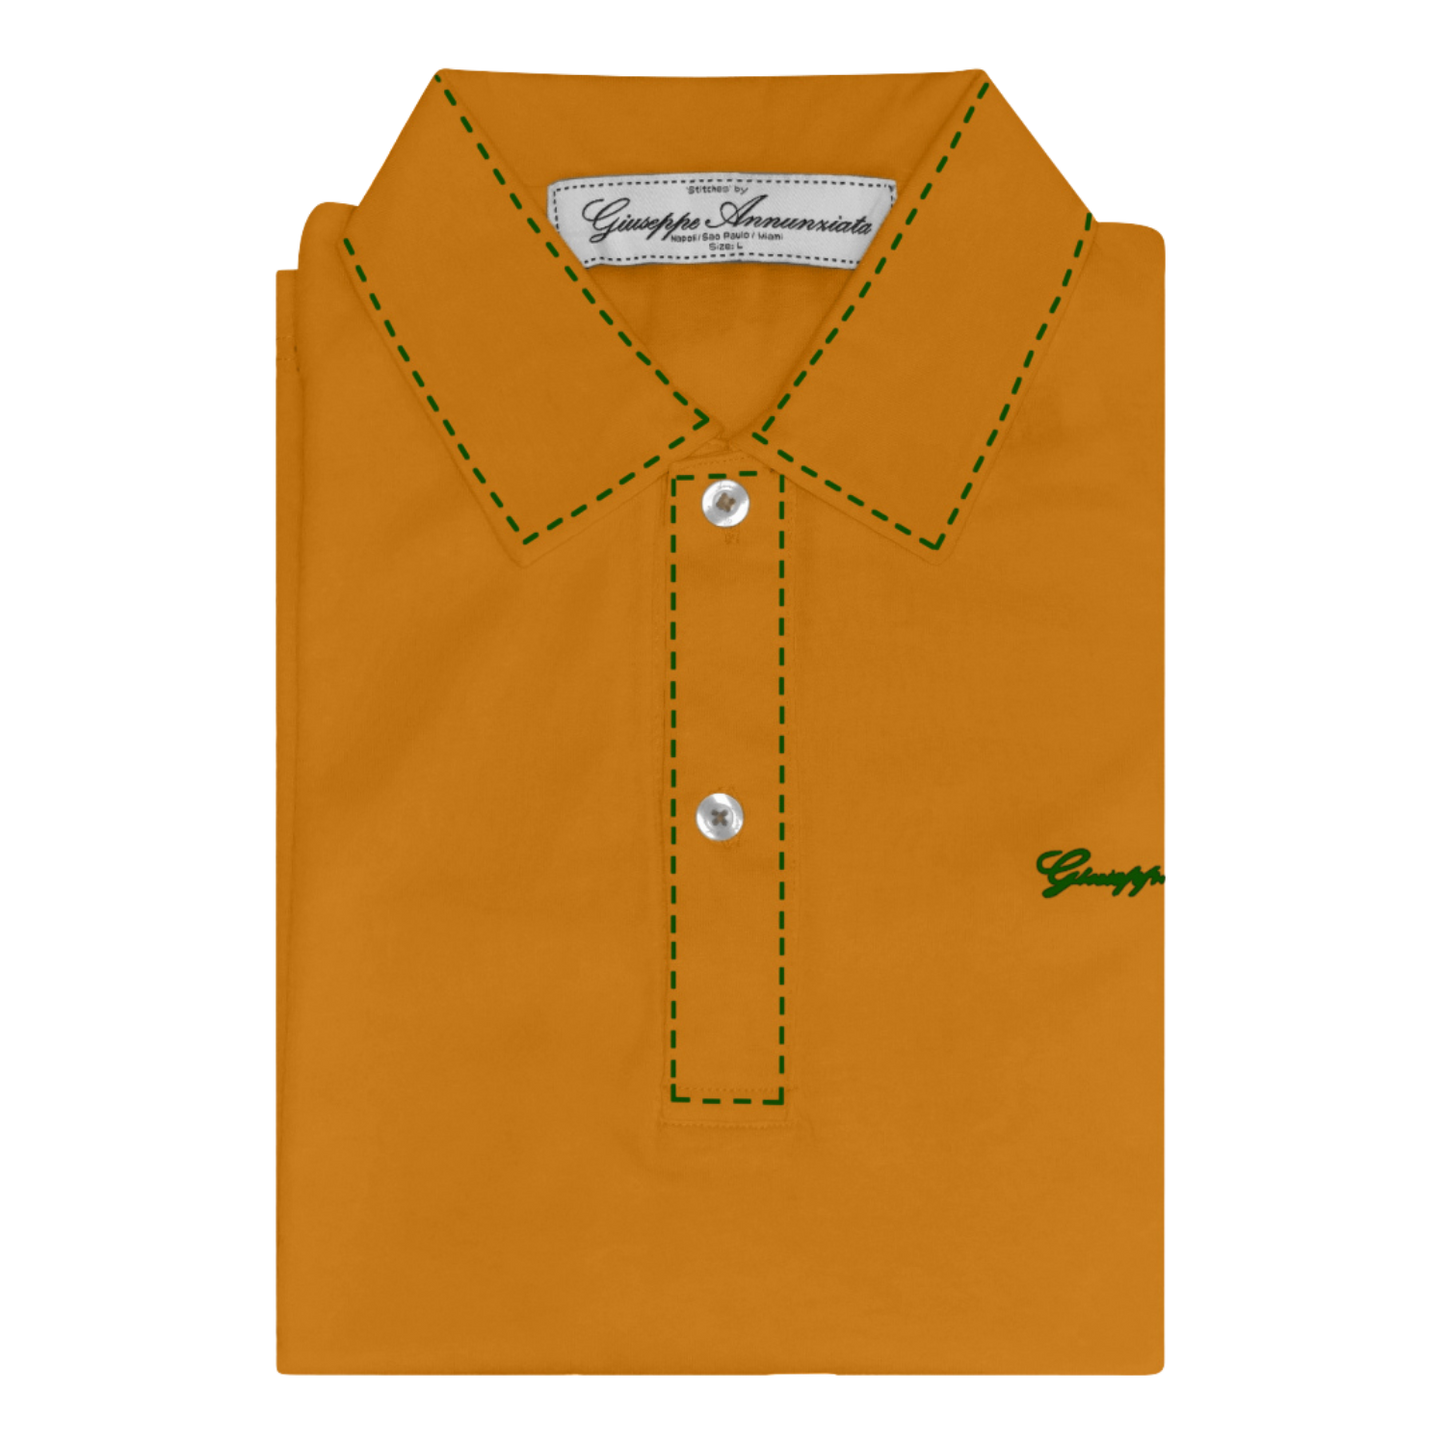 Stitches Polo Ocre and Green